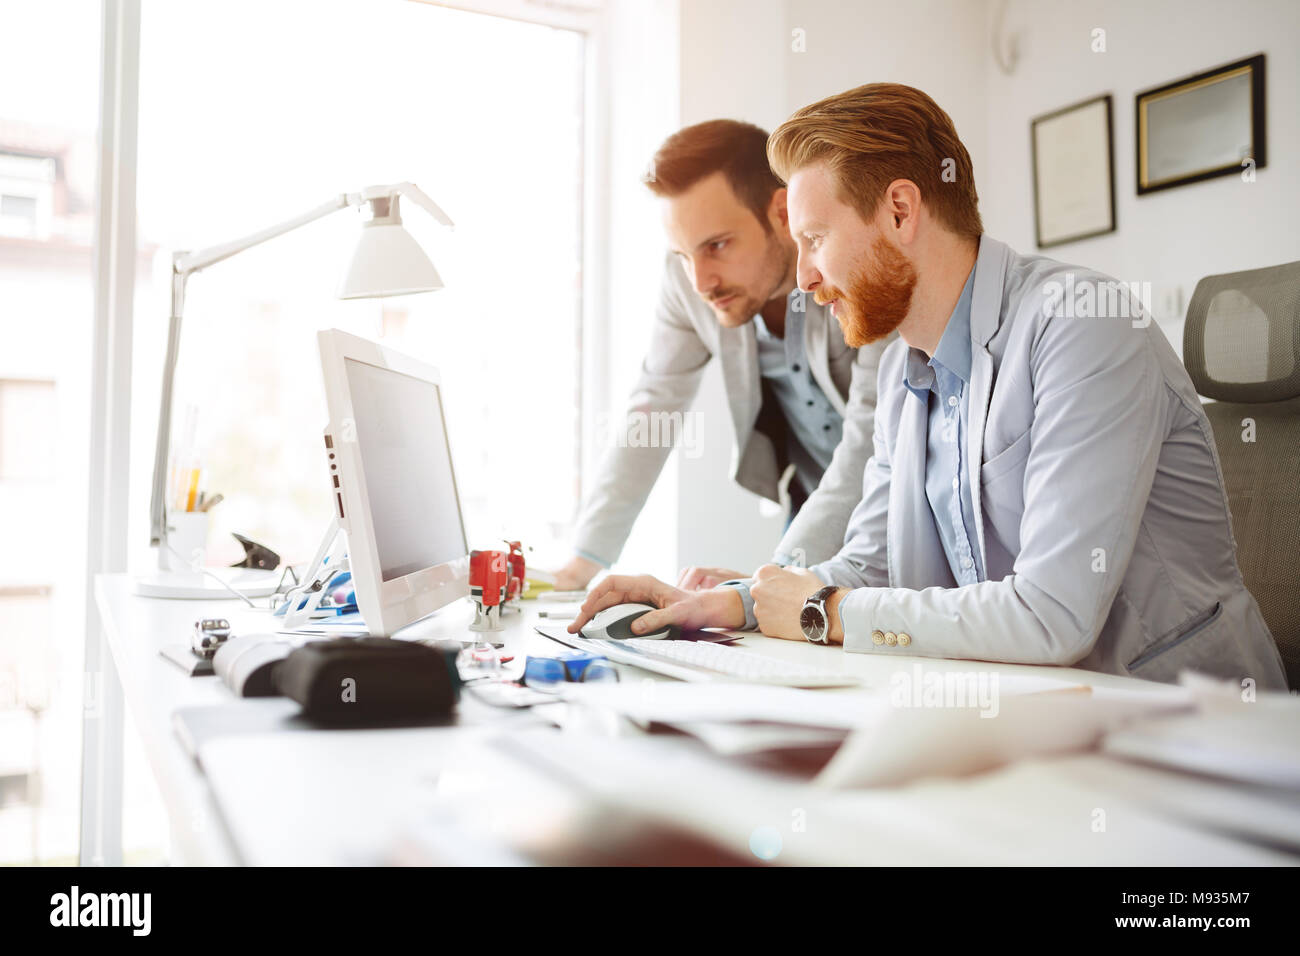 Coworkers planning startup goals Stock Photo